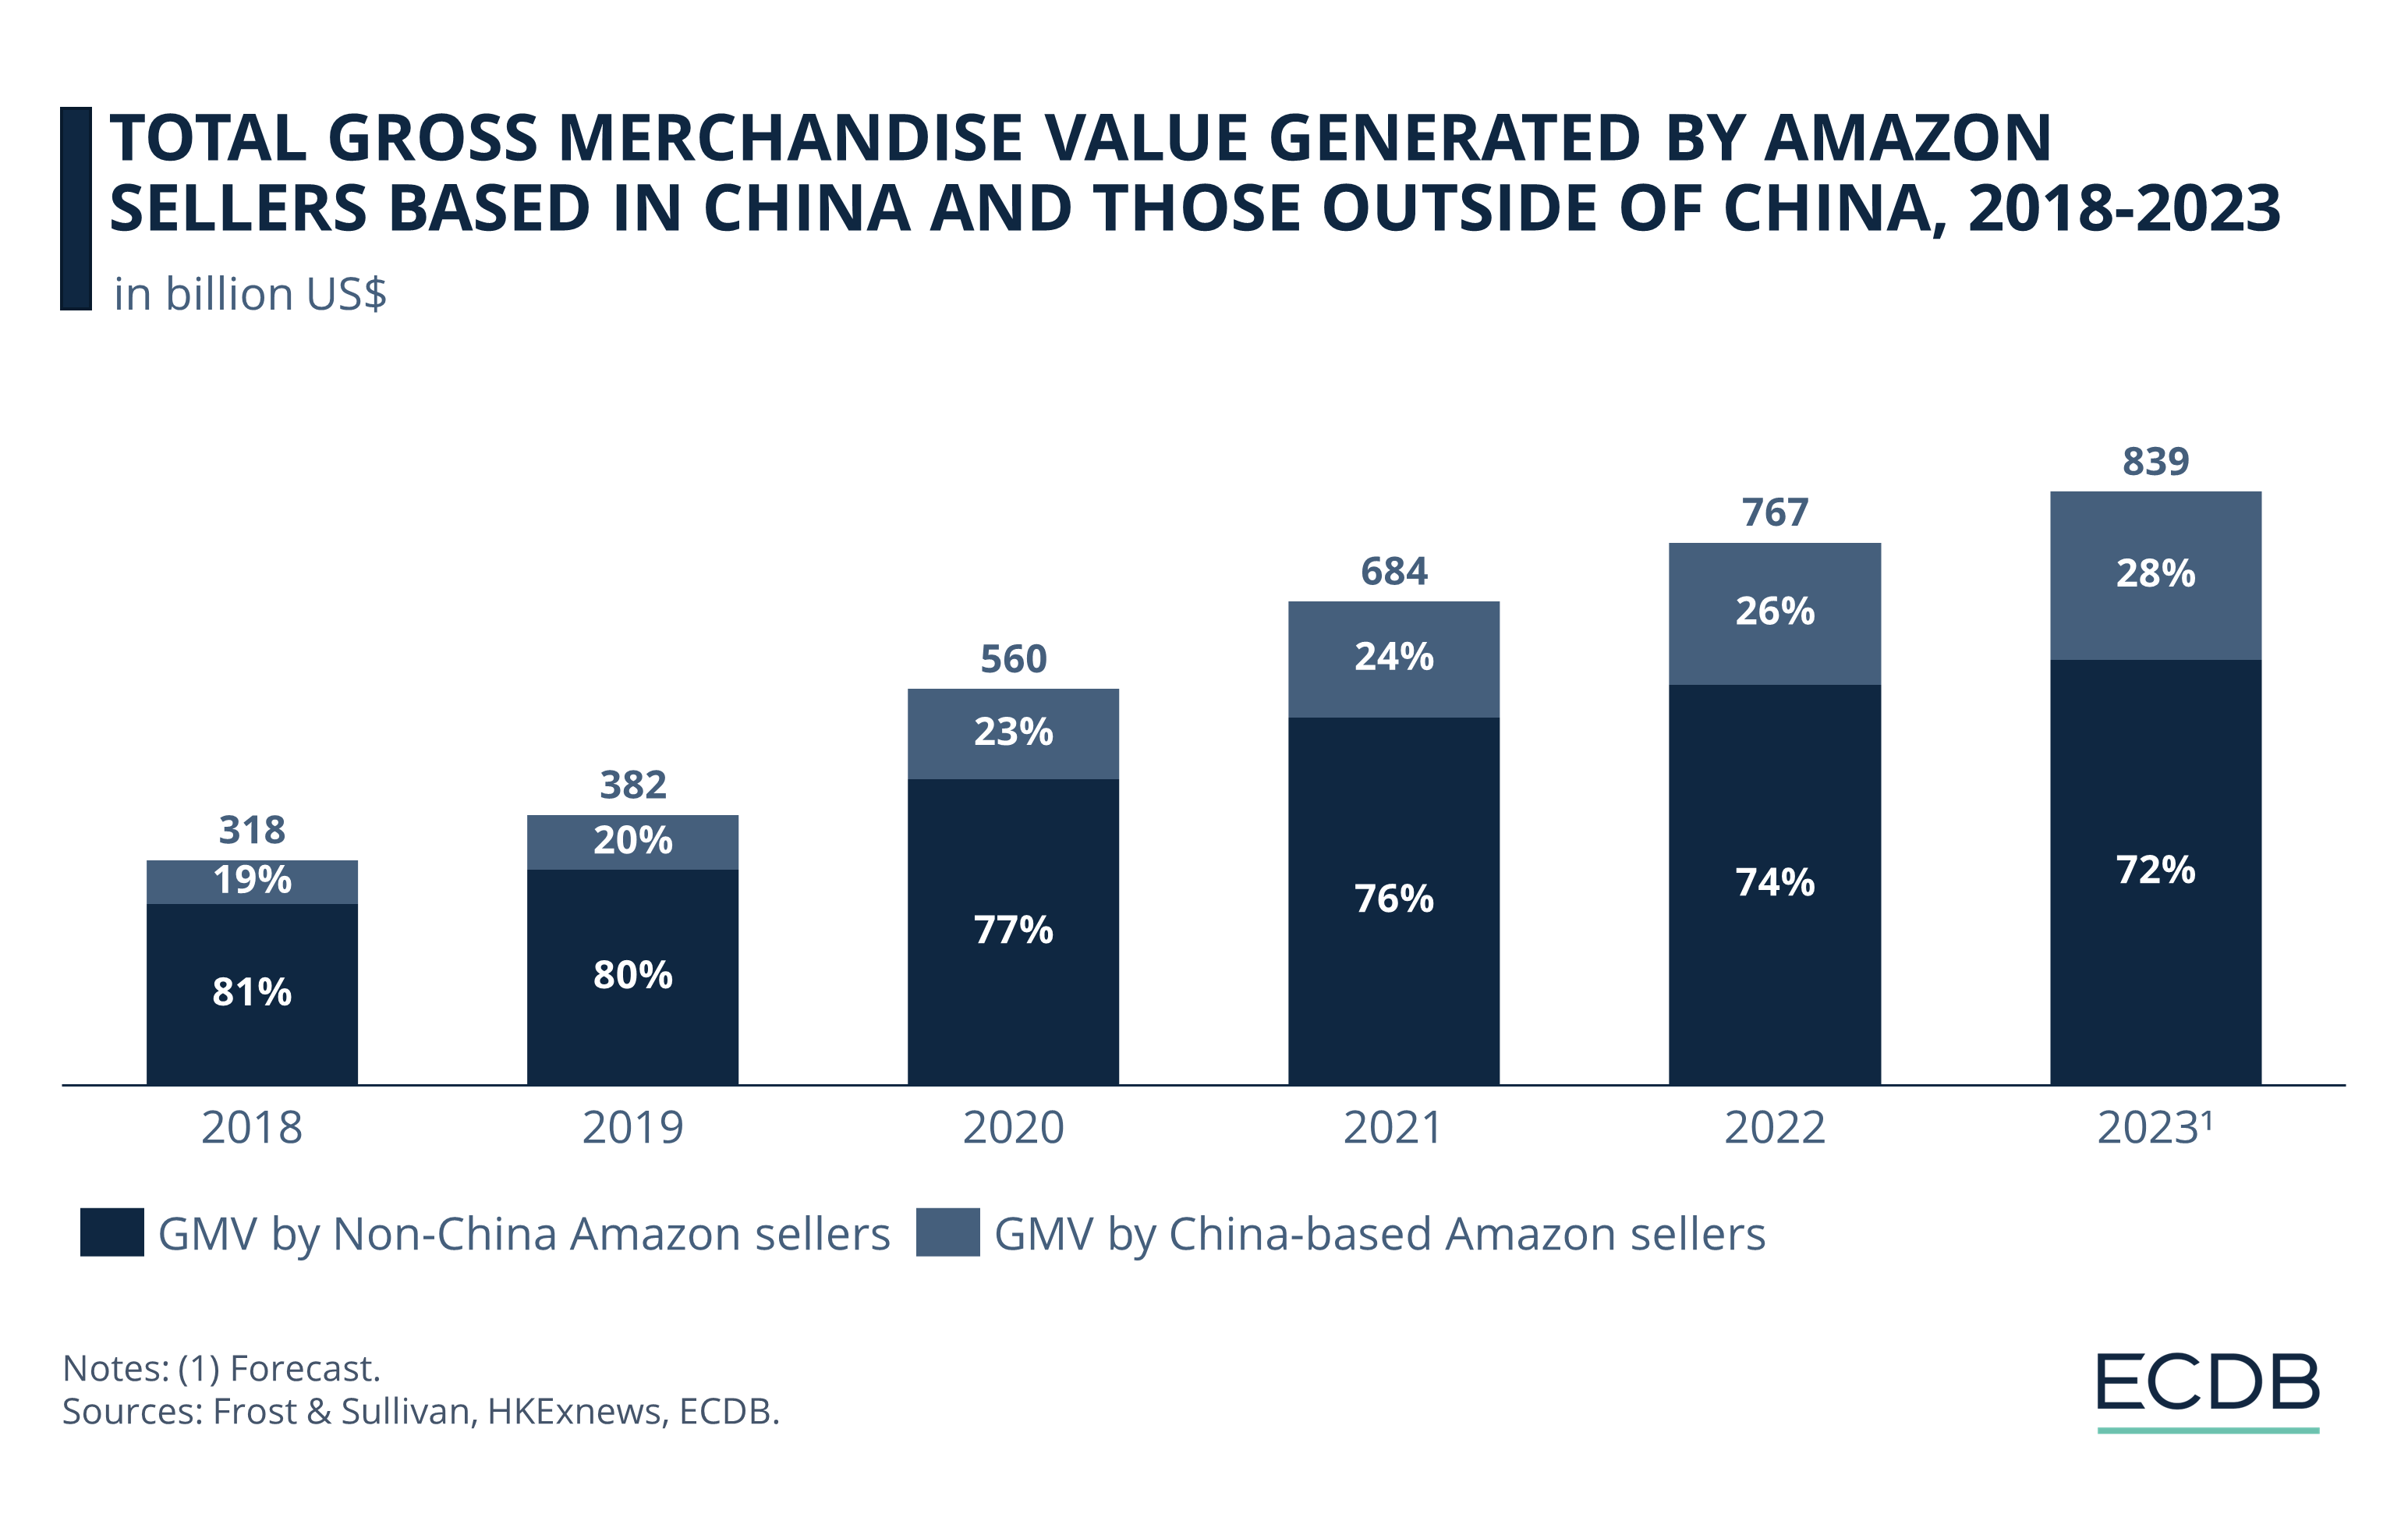 Total GMV Generated by Amazon Sellers In and Outside of China, 2018-2022